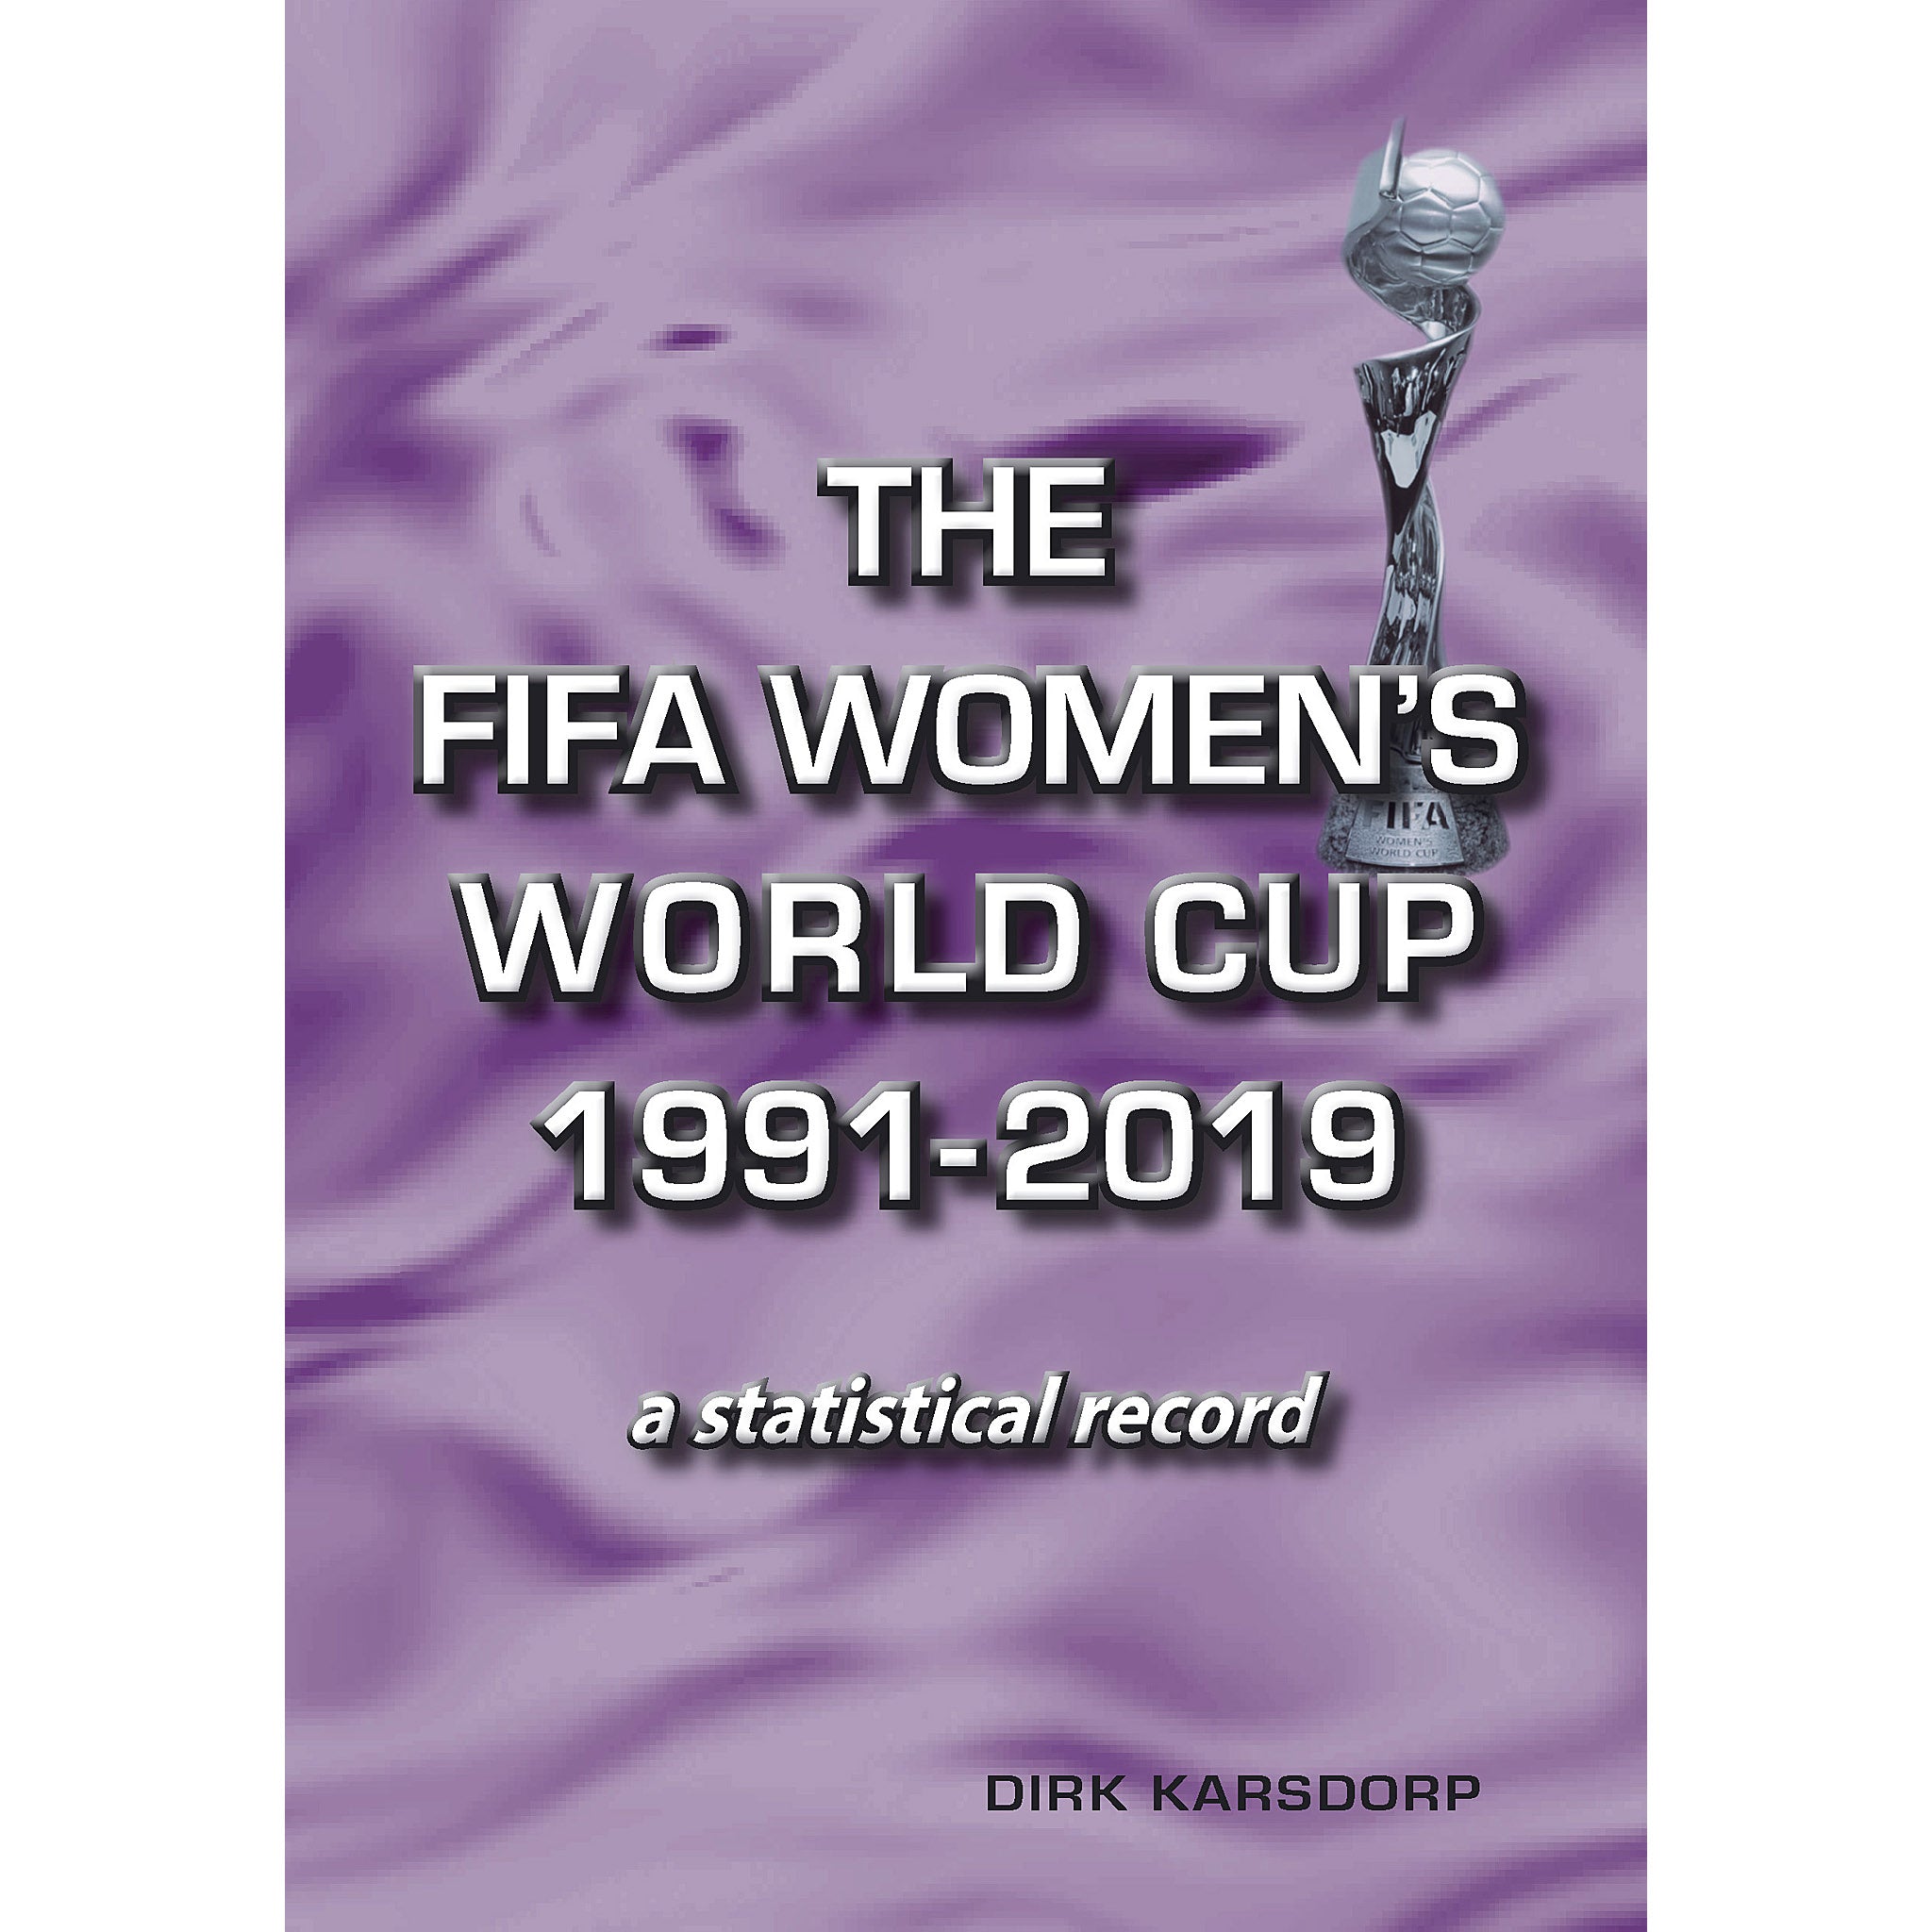 The FIFA Women's World Cup 1991-2019 – a statistical record